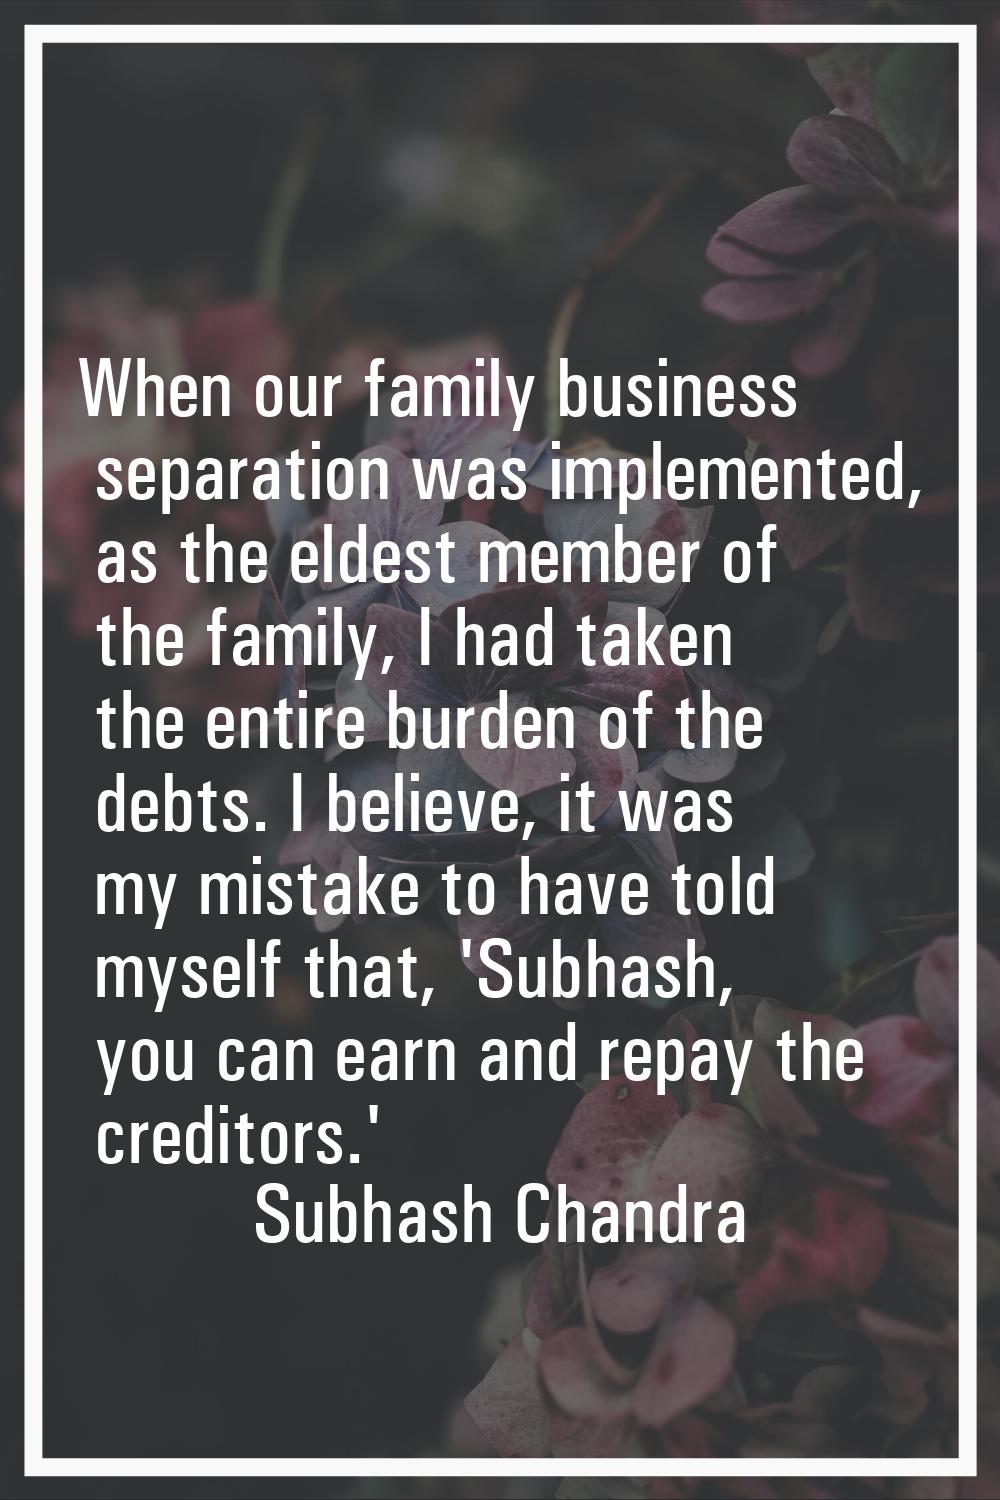 When our family business separation was implemented, as the eldest member of the family, I had take